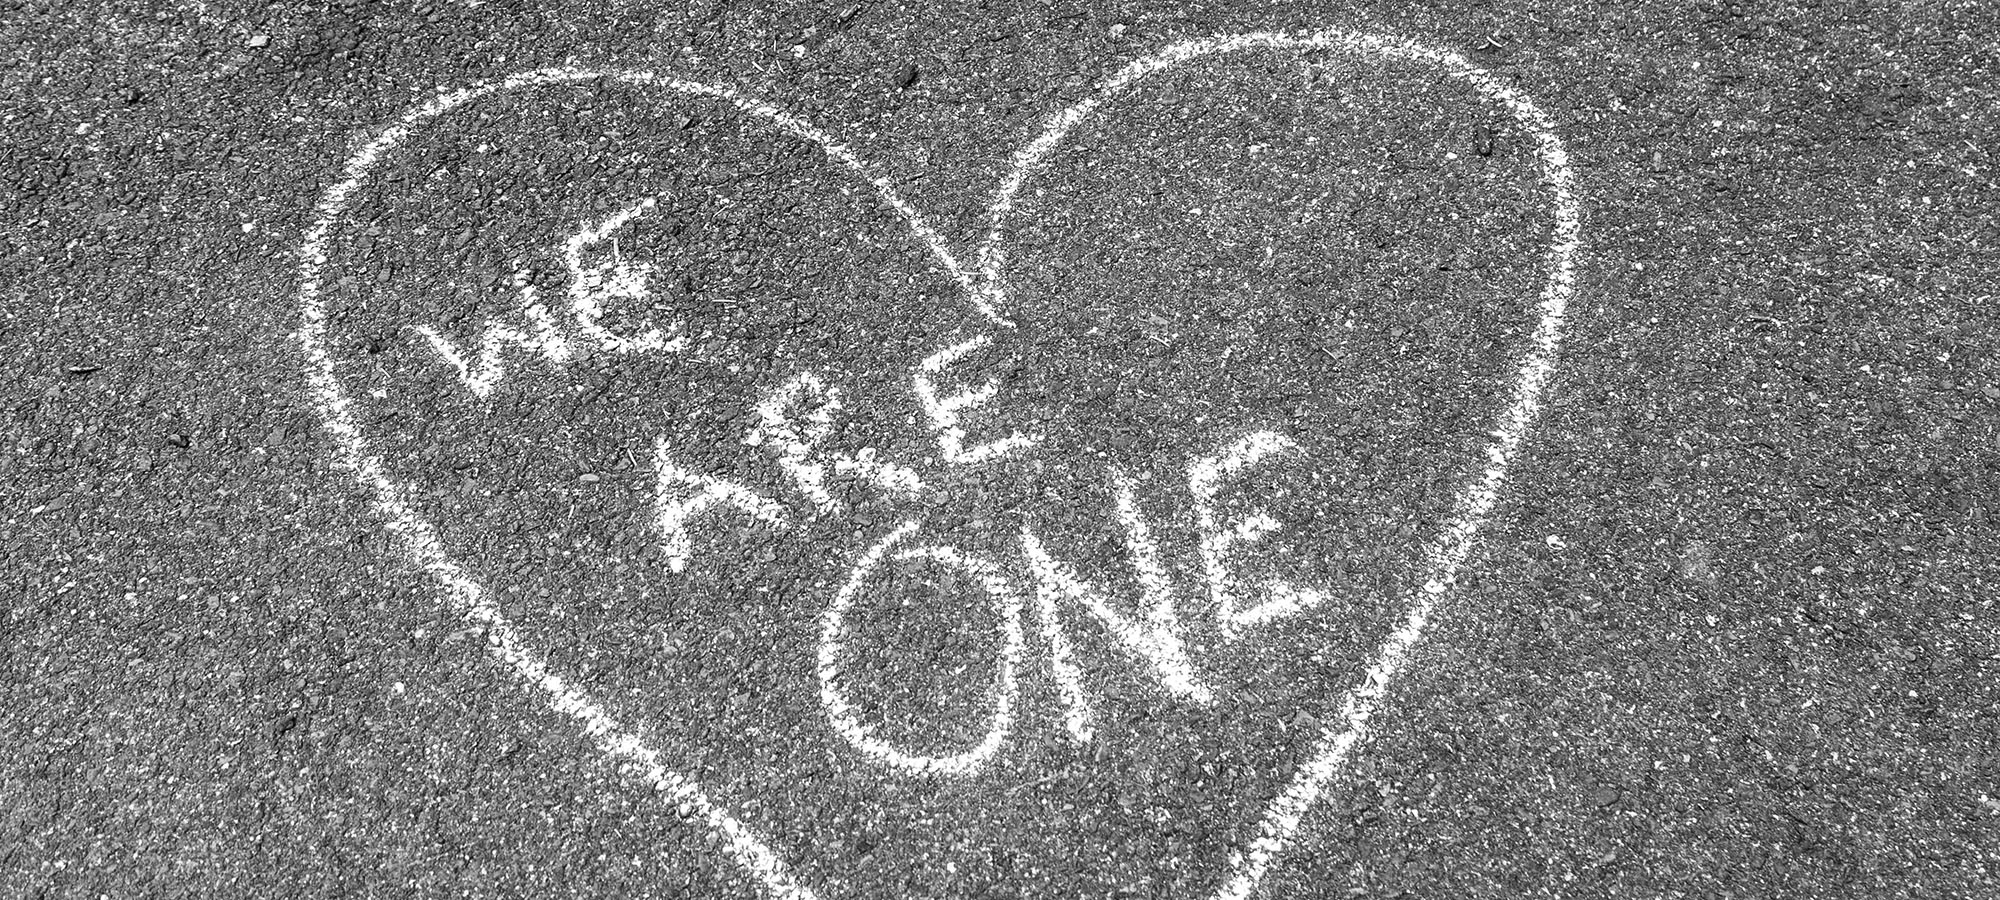 Heart drawn in chalk on the ground with the words 'we are one'